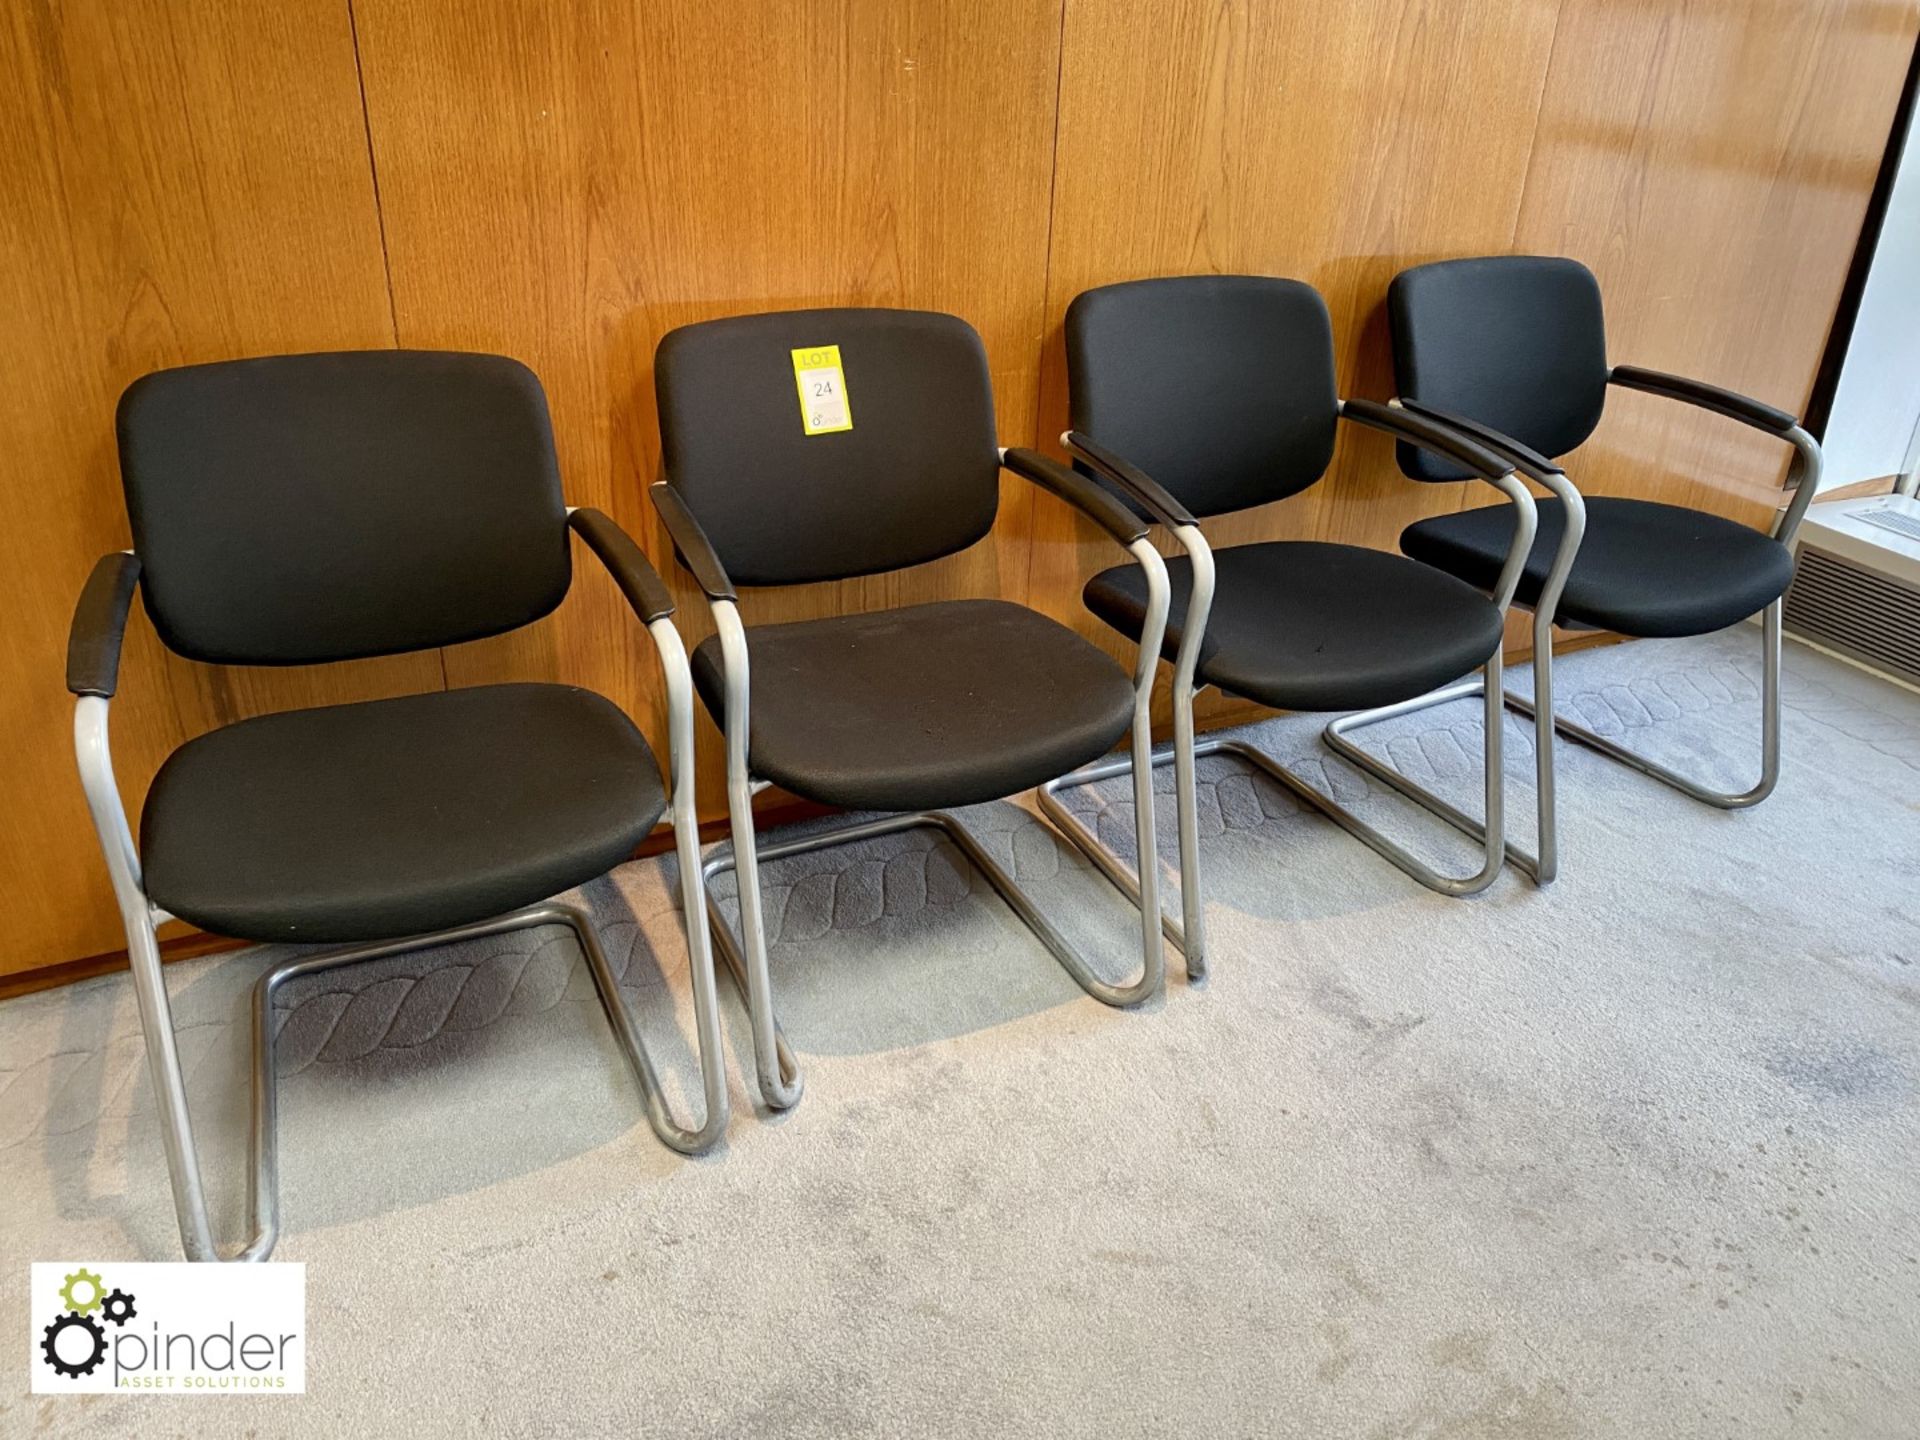 Set 4 upholstered cantilever Meeting Chairs, black (located in Meeting Room 5 on 23rd Floor)